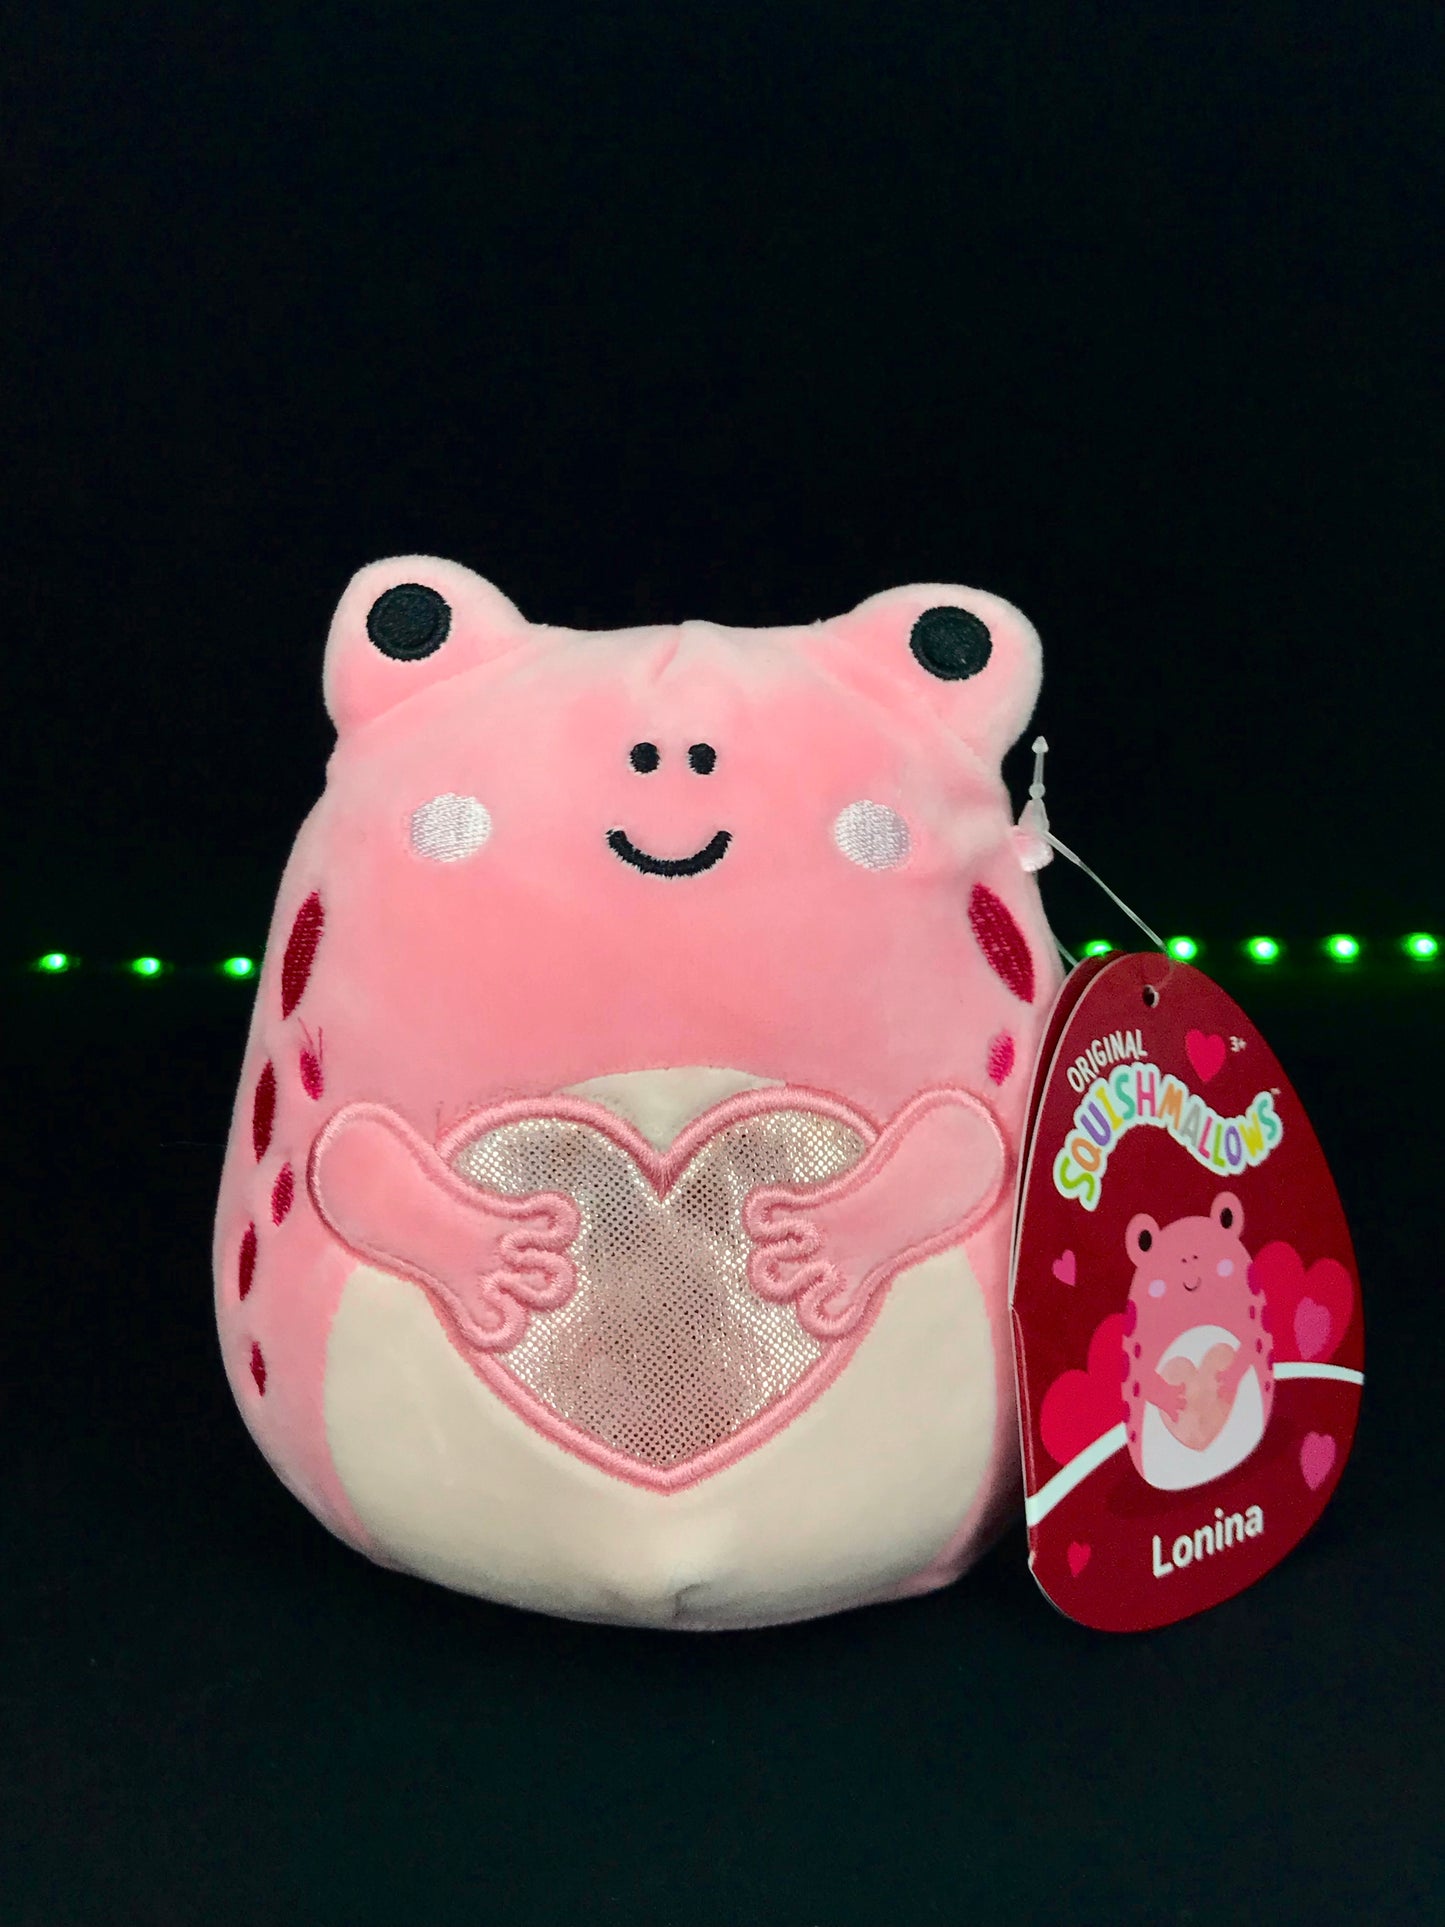 Squishmallow 4” Lonina the Frog